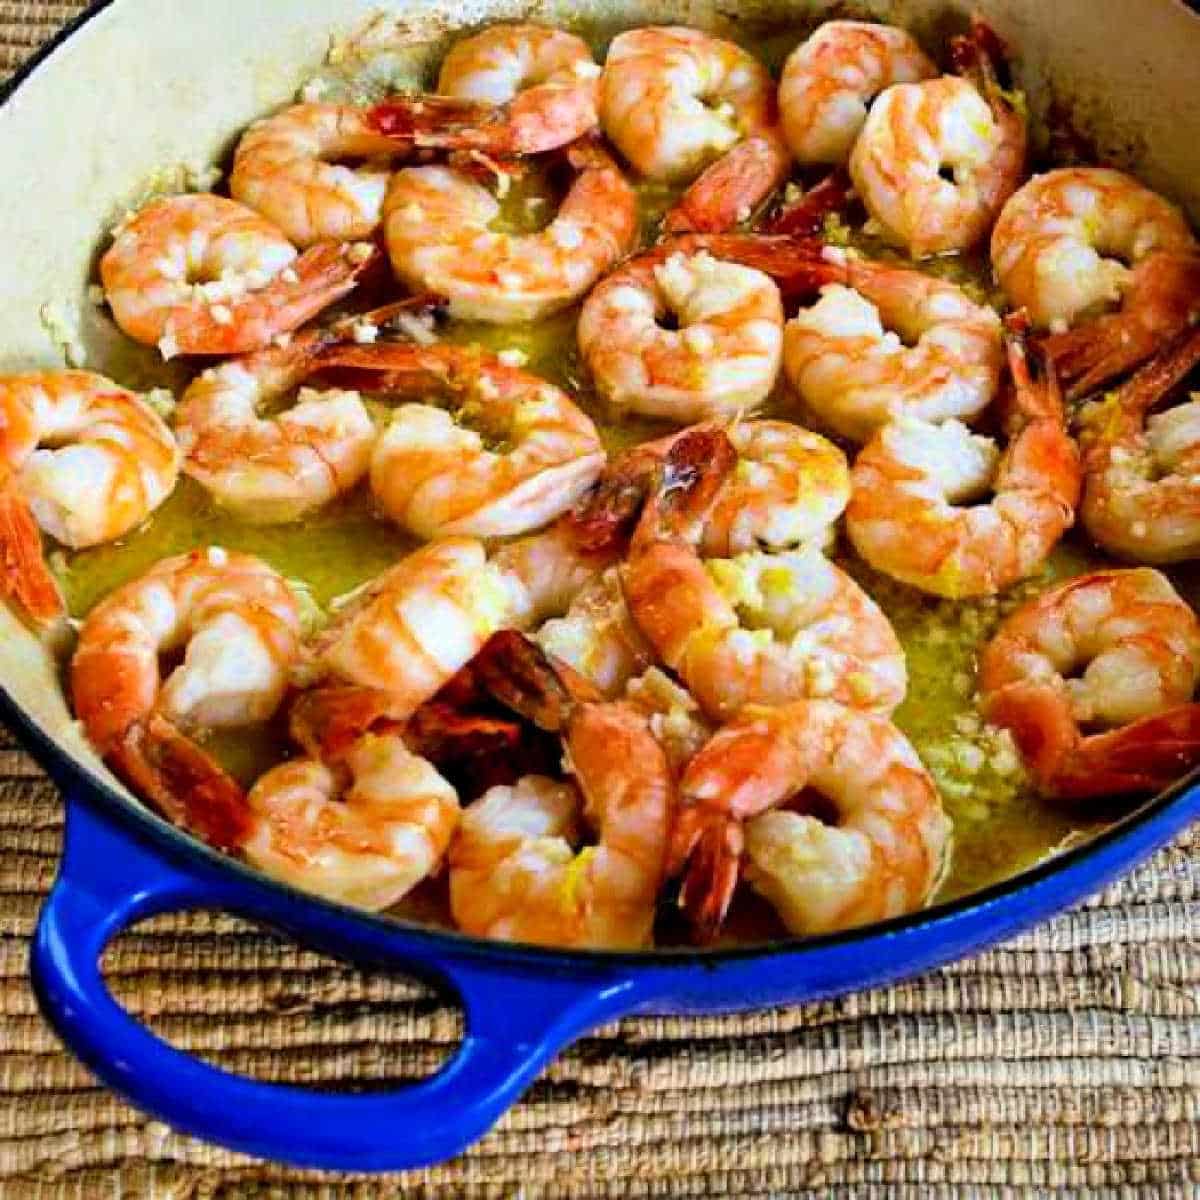 Easy Garlic and Lemon Shrimp shown on heavy cooking pan